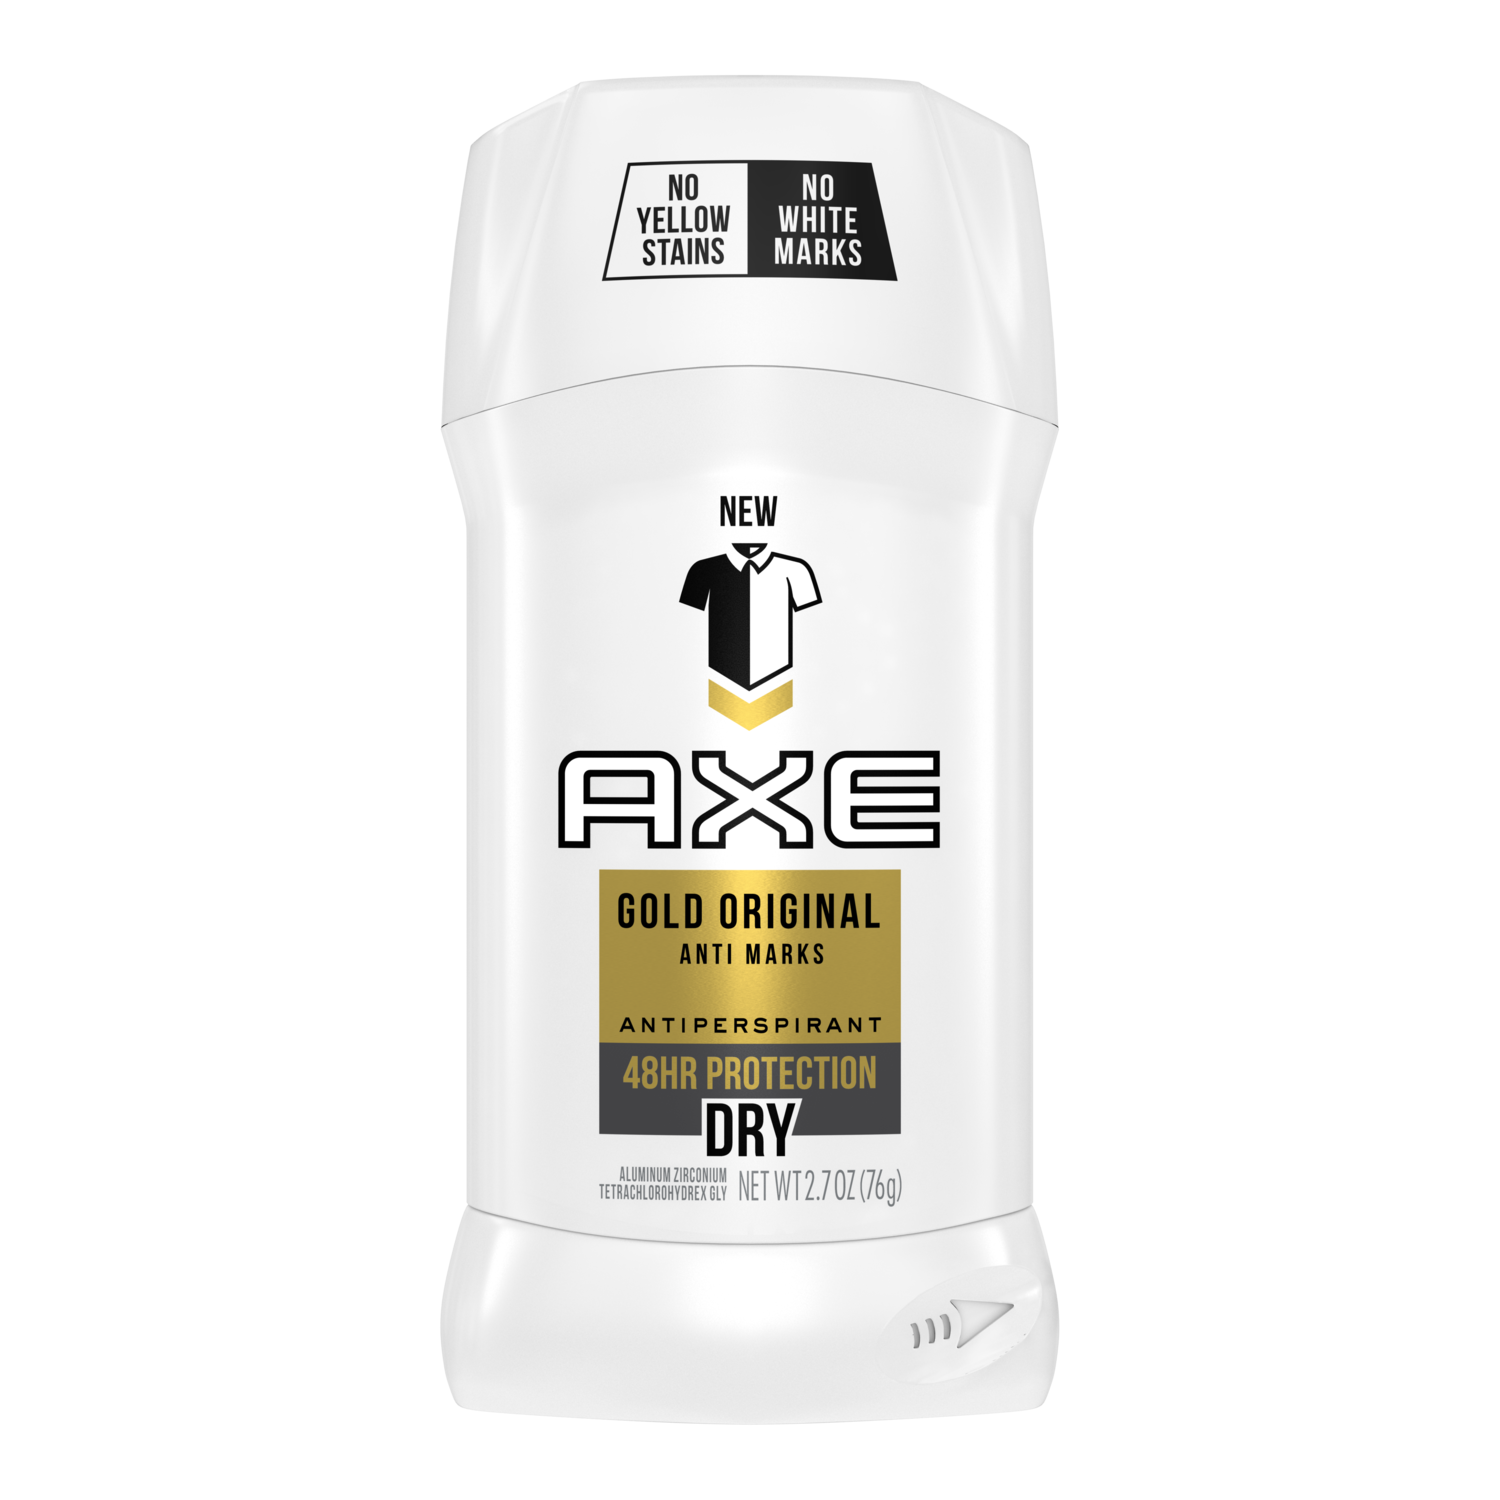 Axe: Men's Grooming, Lifestyle and Style Tips & Hacks| Axe